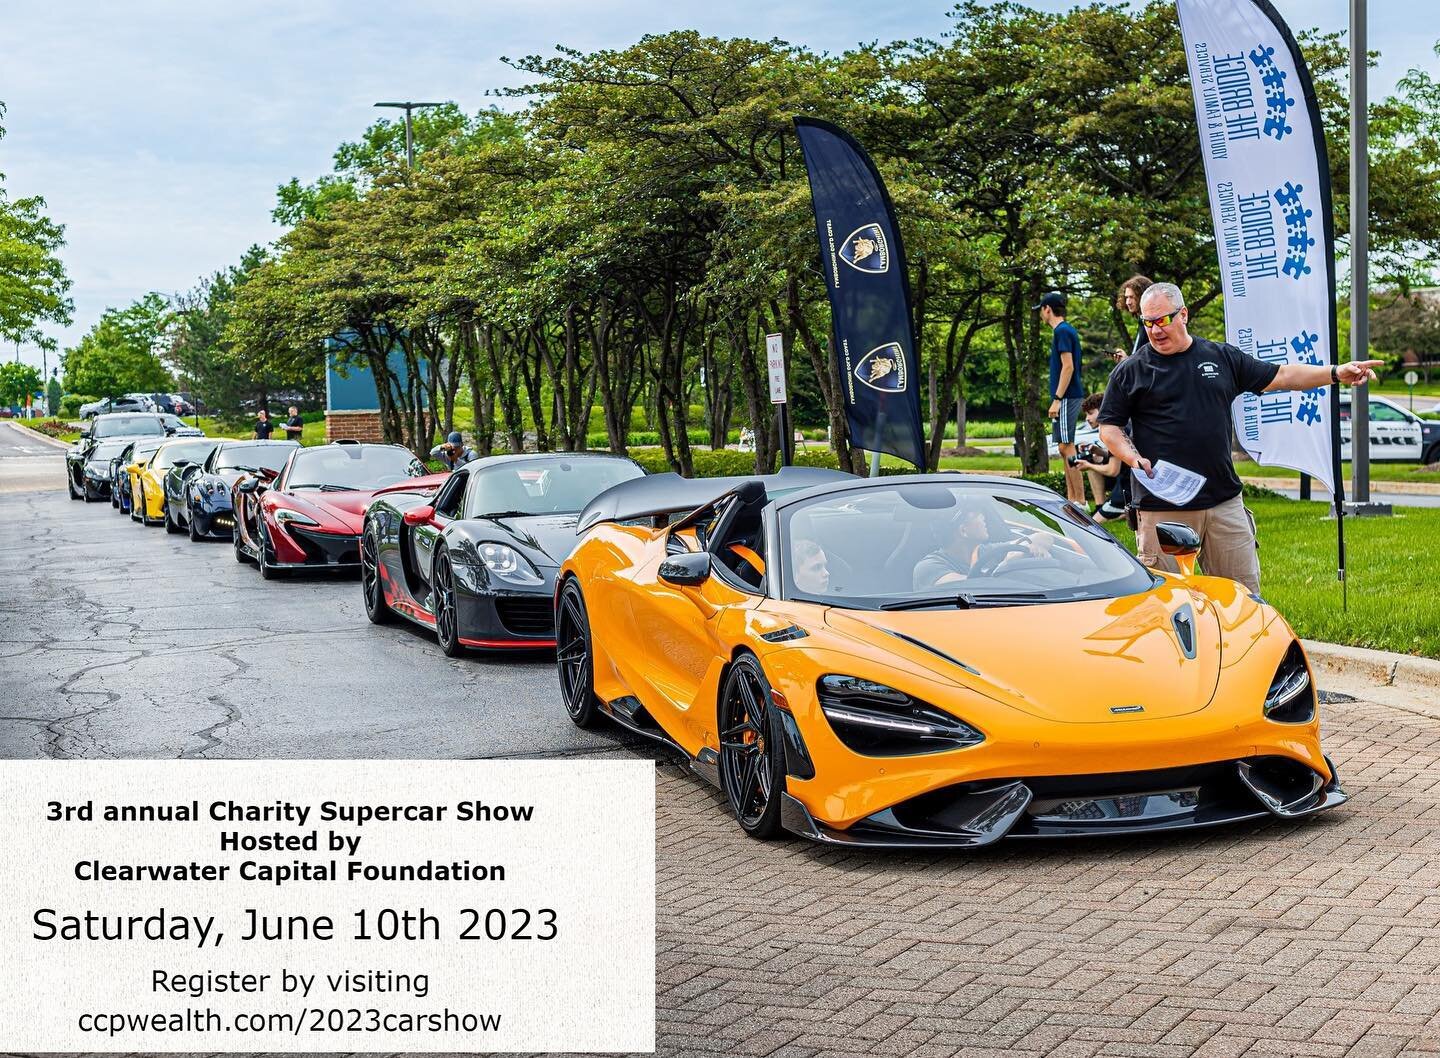 Registration is live! Please click the link in our bio to register your car(s), RSVP to our Facebook event, or to learn more about the event. Ccpwealth.com/2023CarShow